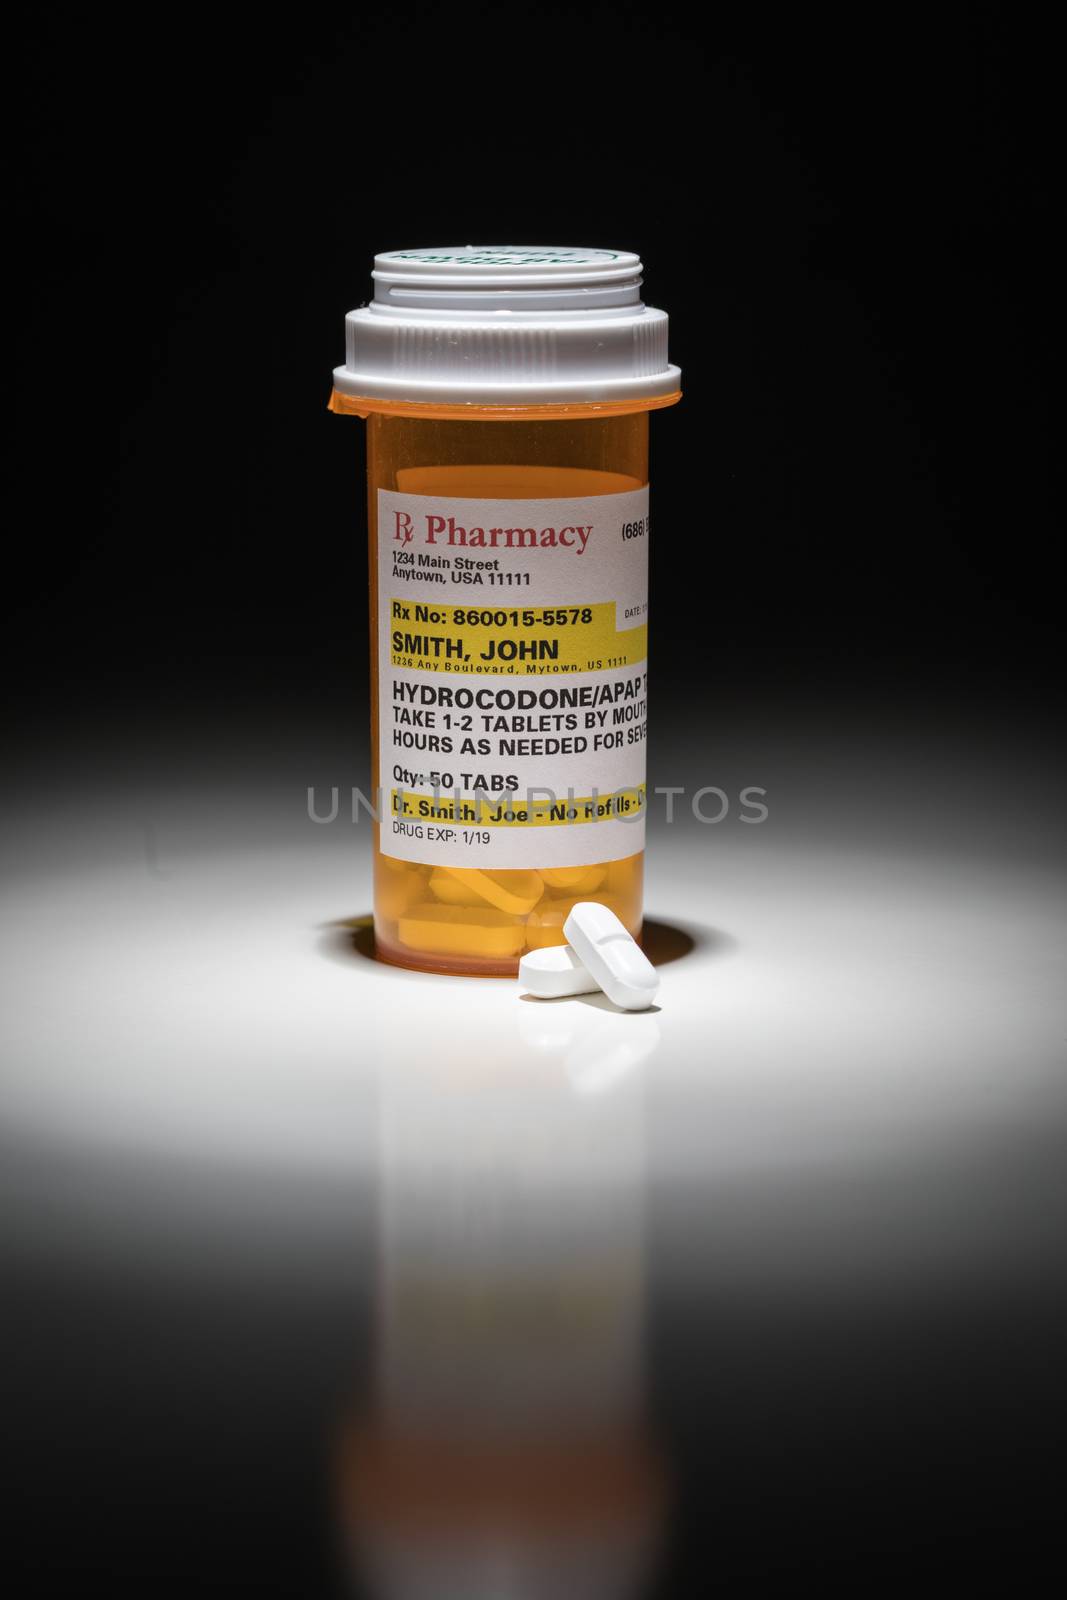 Hydrocodone Pills and Prescription Bottle with Non Proprietary Label. No model release required - contains ficticious information. by Feverpitched